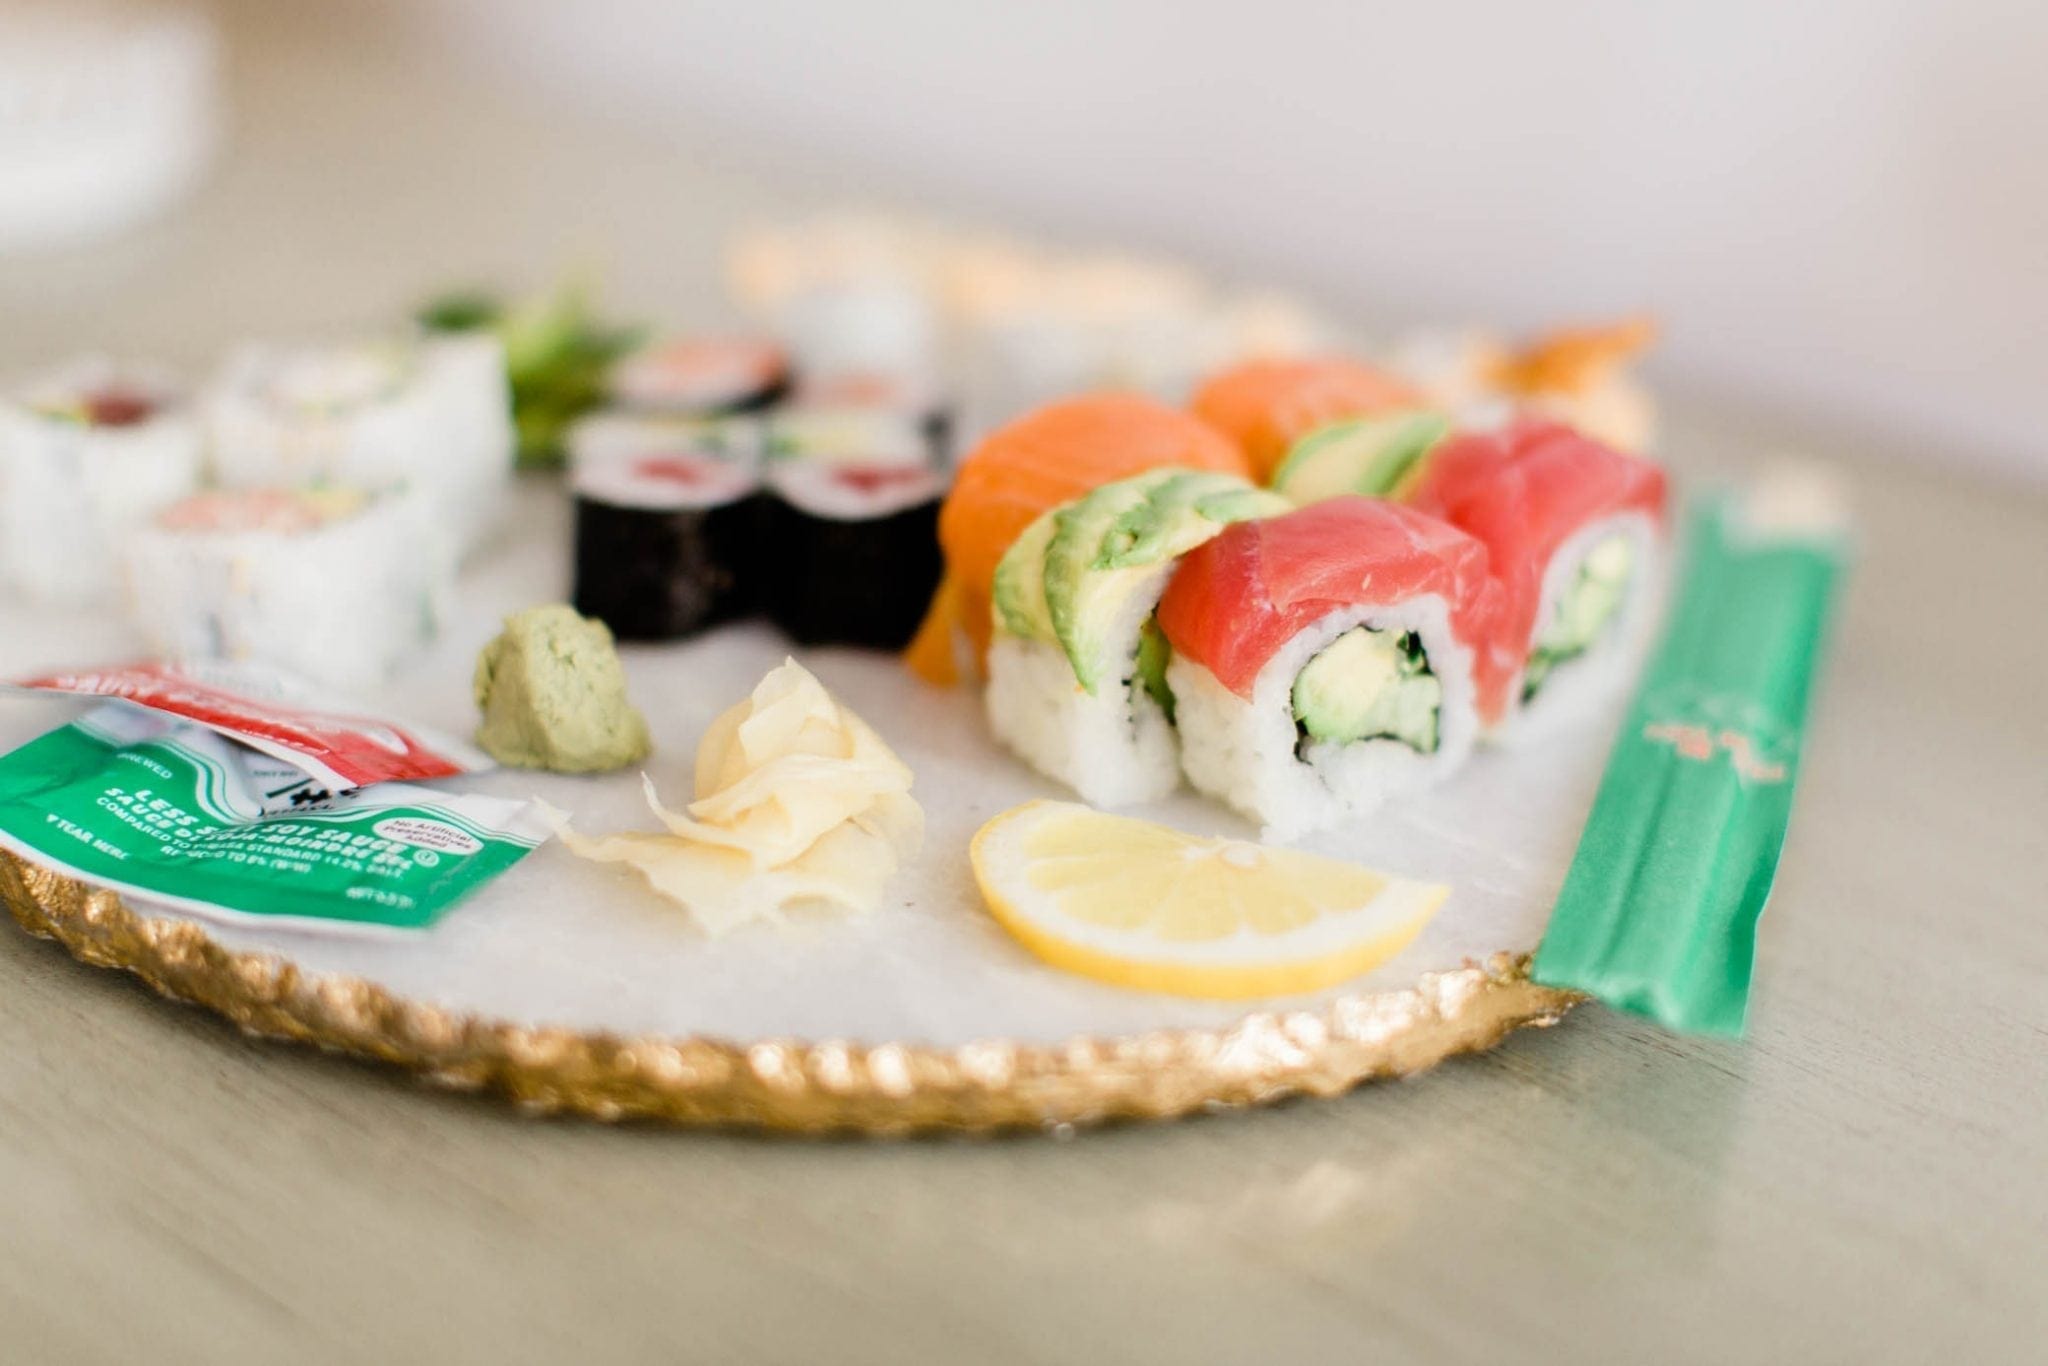 What You Need to Know about Eating Sushi While Pregnant